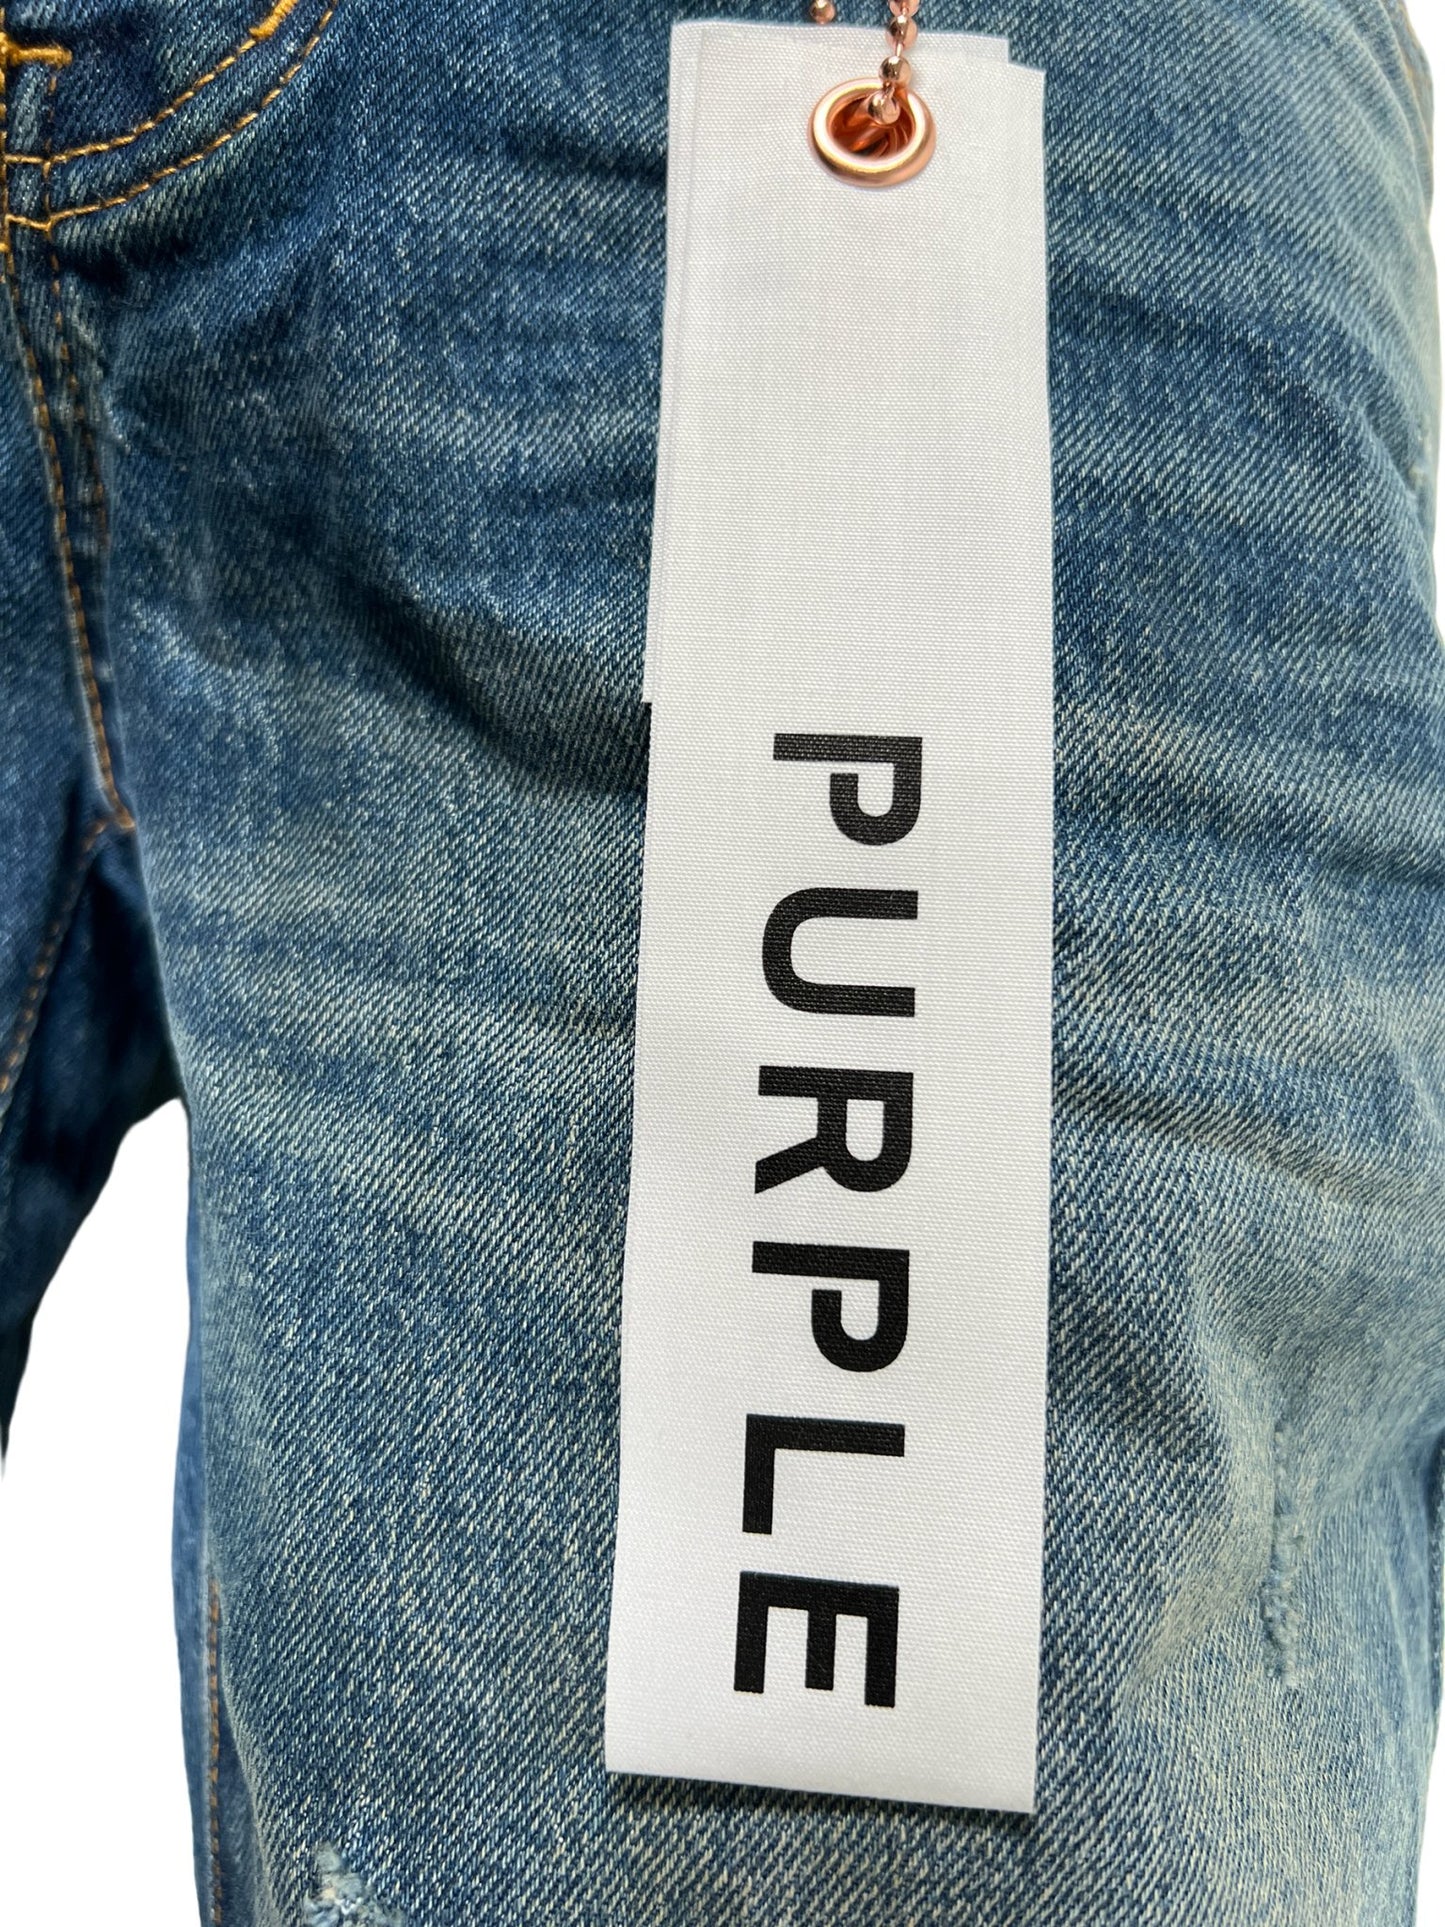 A pair of PURPLE BRAND jeans with a label that says purple.